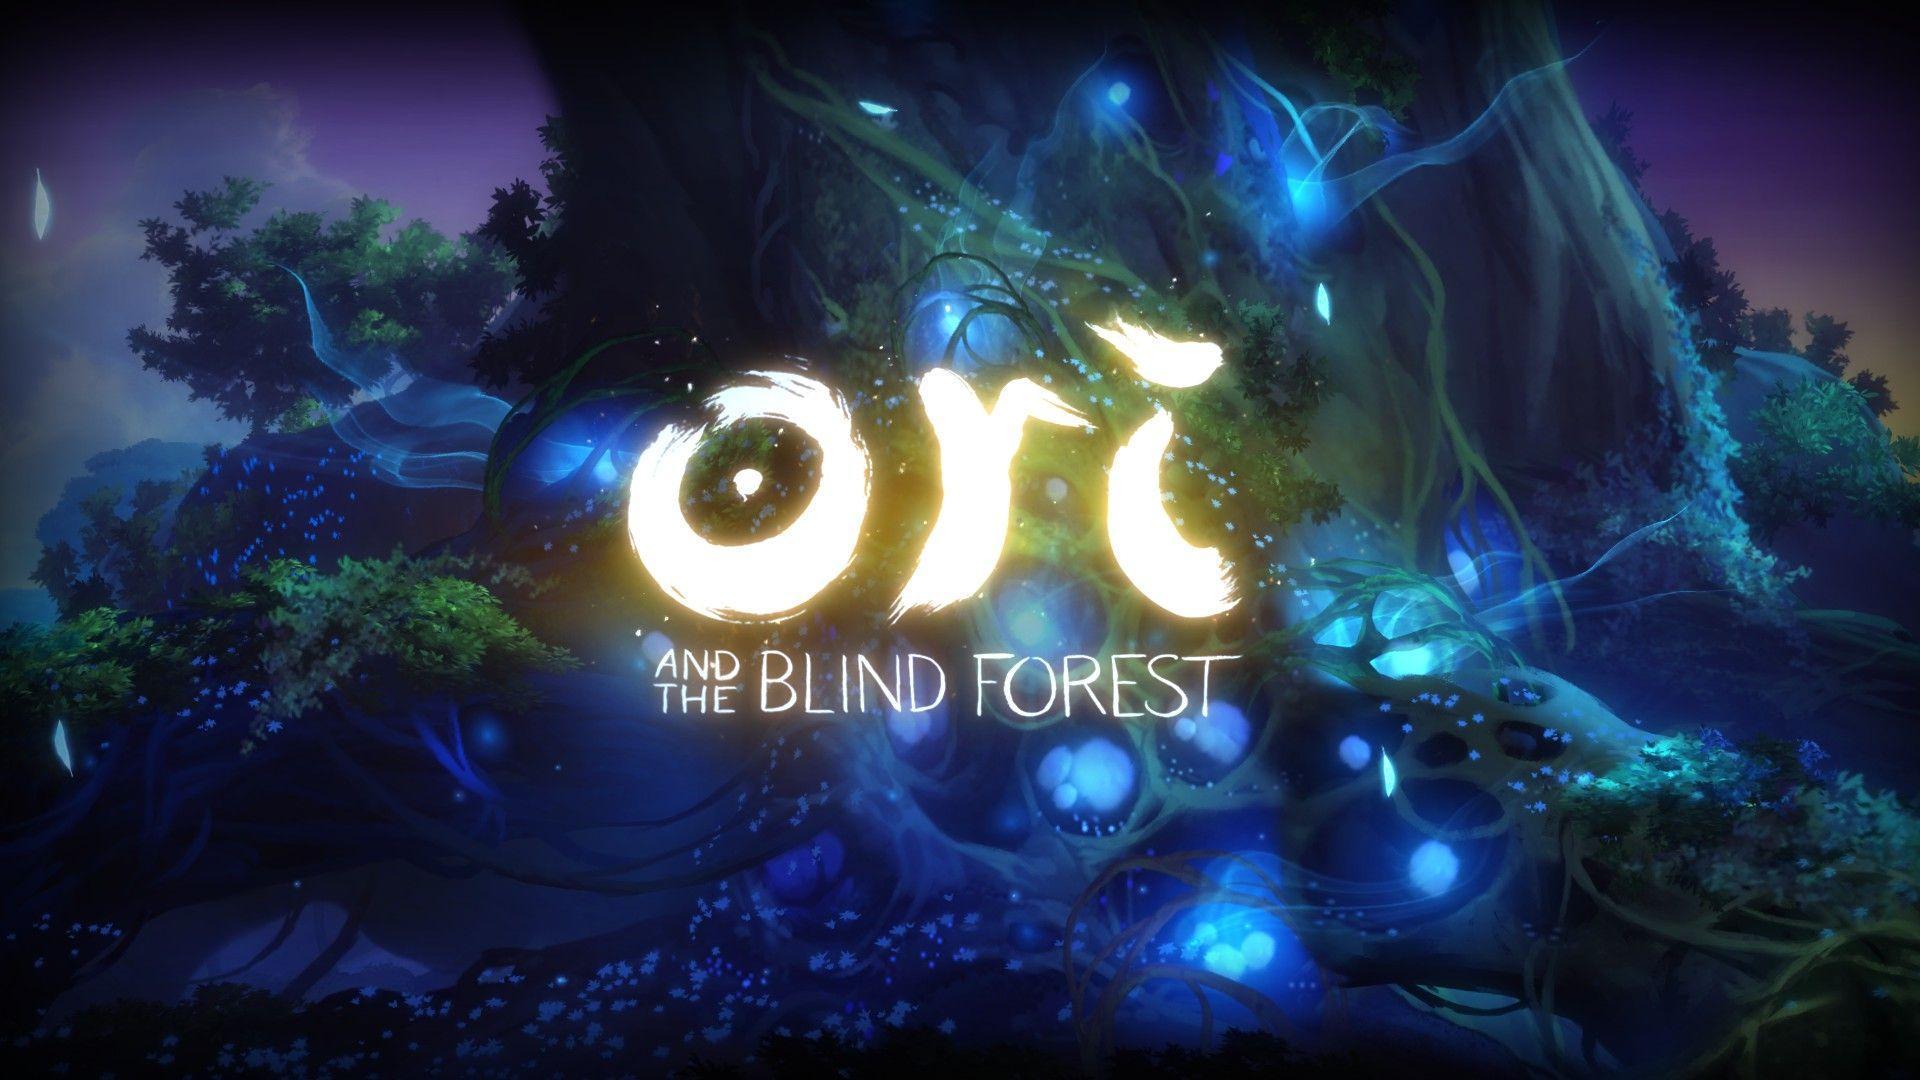 Ori And The Blind Forest Screenshots Possible Wallpaper?